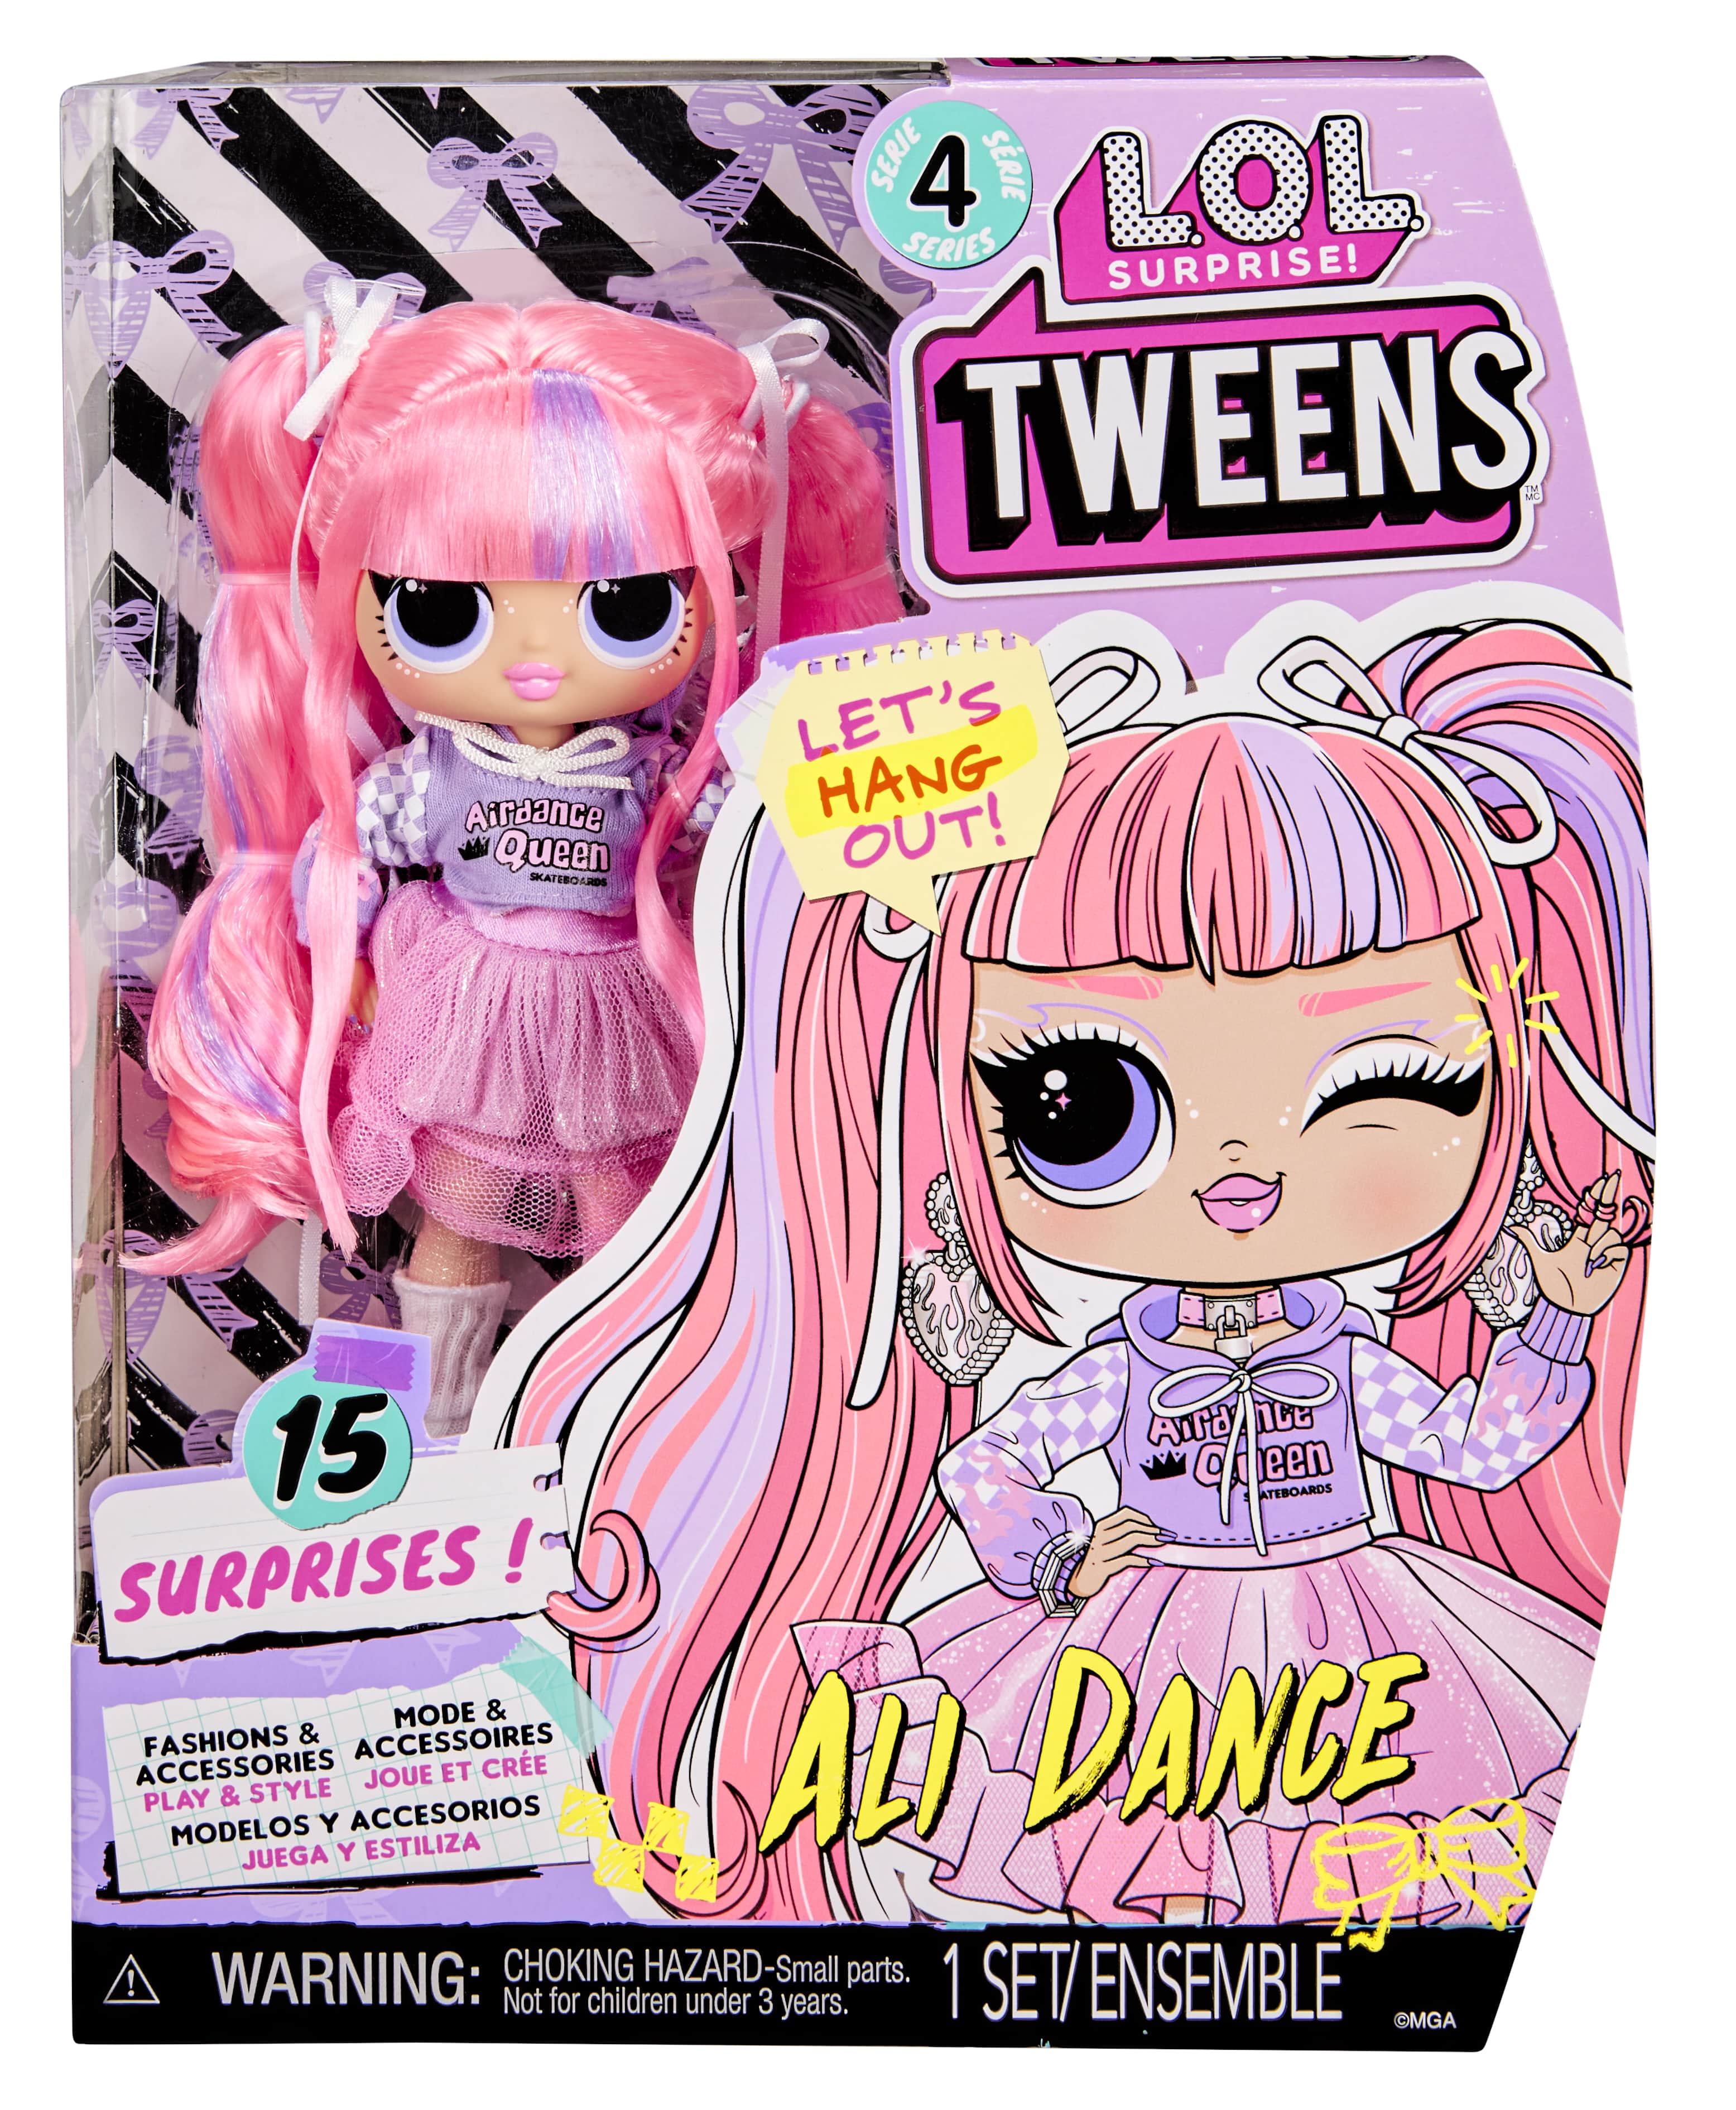 LOL Surprise Tweens Series 4 Fashion Doll Ali Dance with 15 Surprises and  Fabulous Accessories – Great Gift for Kids Ages 4+ 